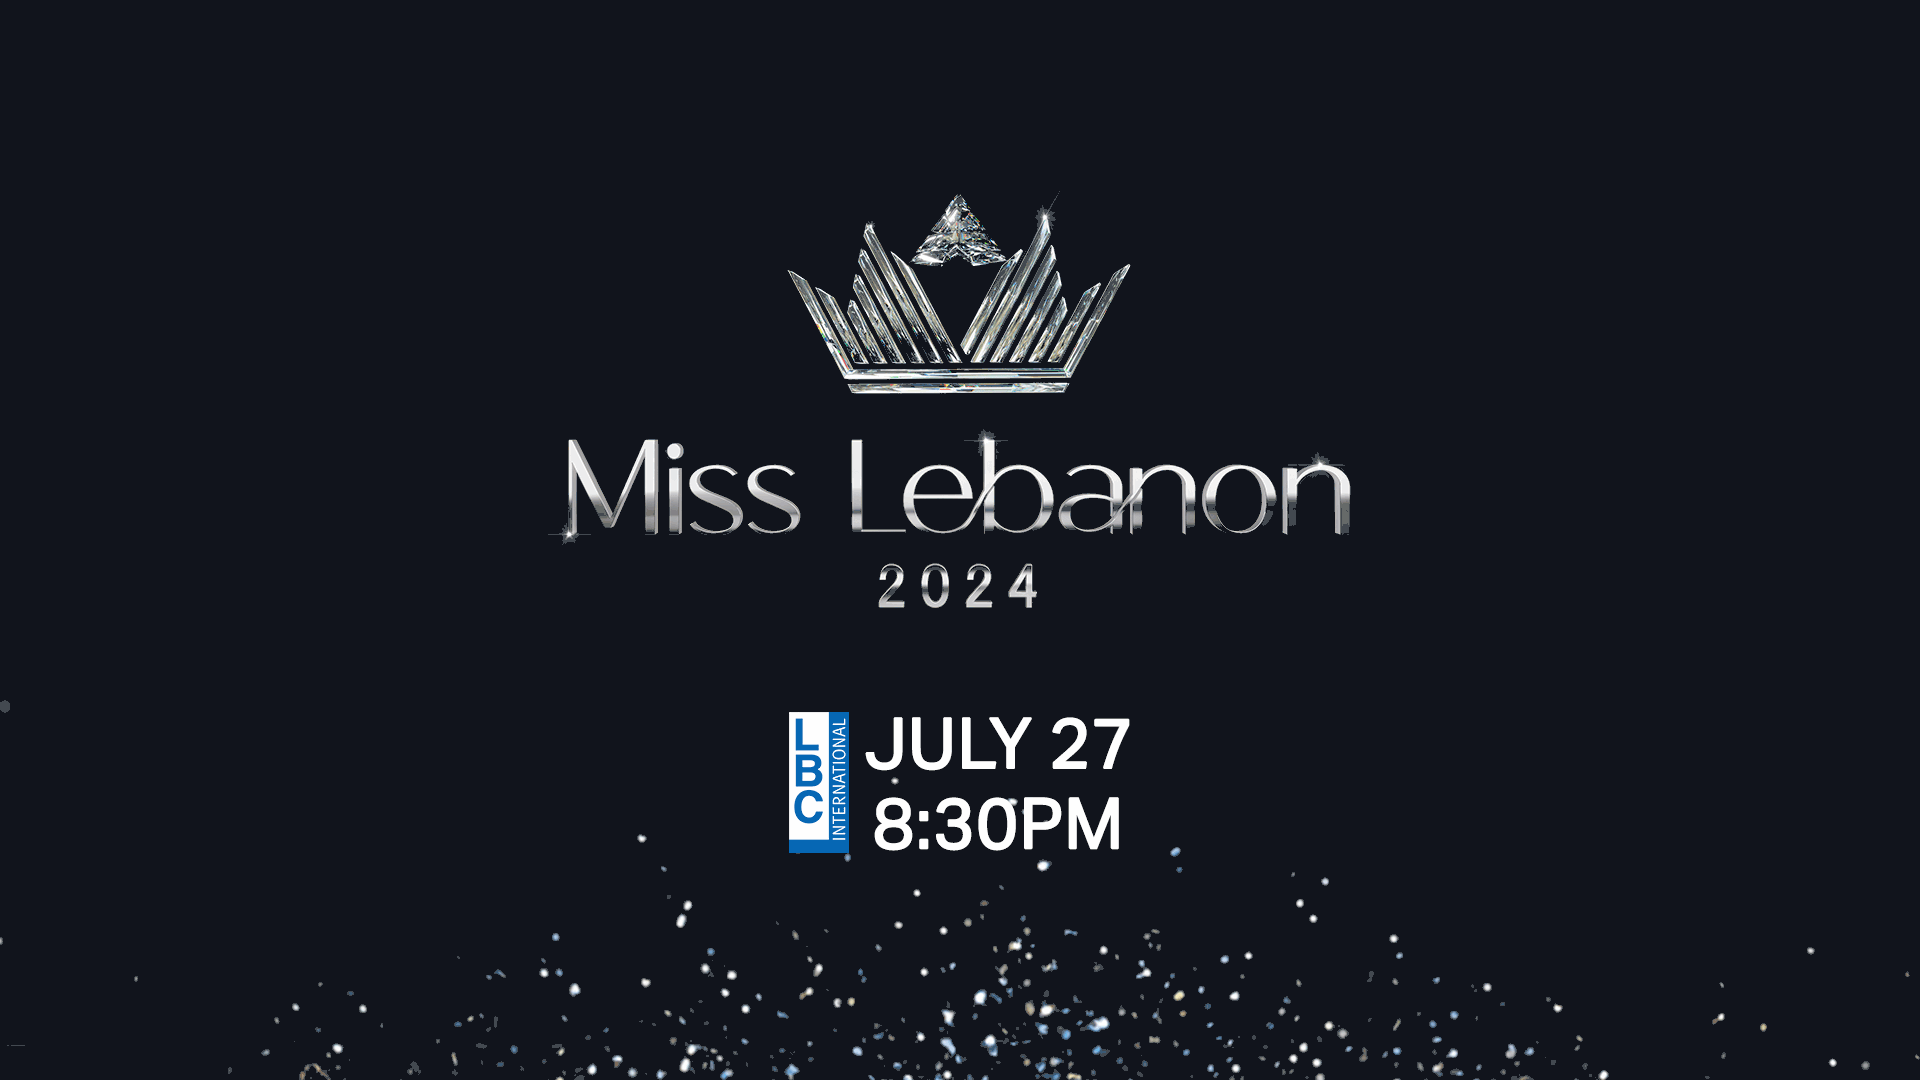 Stay tuned for Miss Lebanon 2024 pageant at 8:30 PM, broadcast live on LBCI and available for streaming on the website https://www.lbcgroup.tv/live/ar